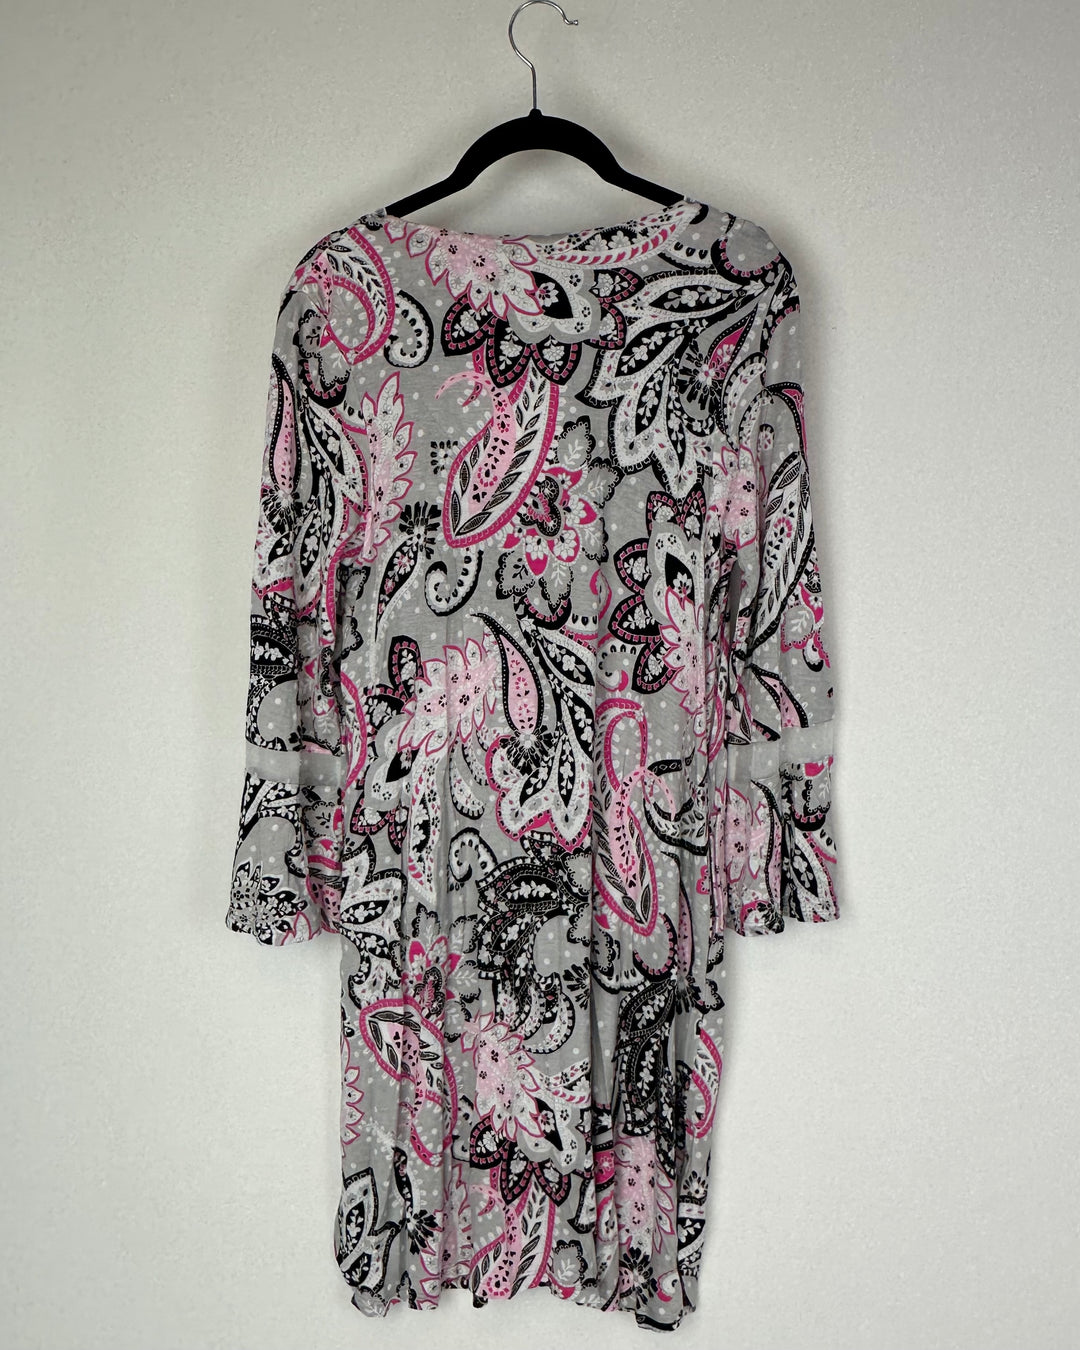 Pink and Black Pattern Nightgown - Small